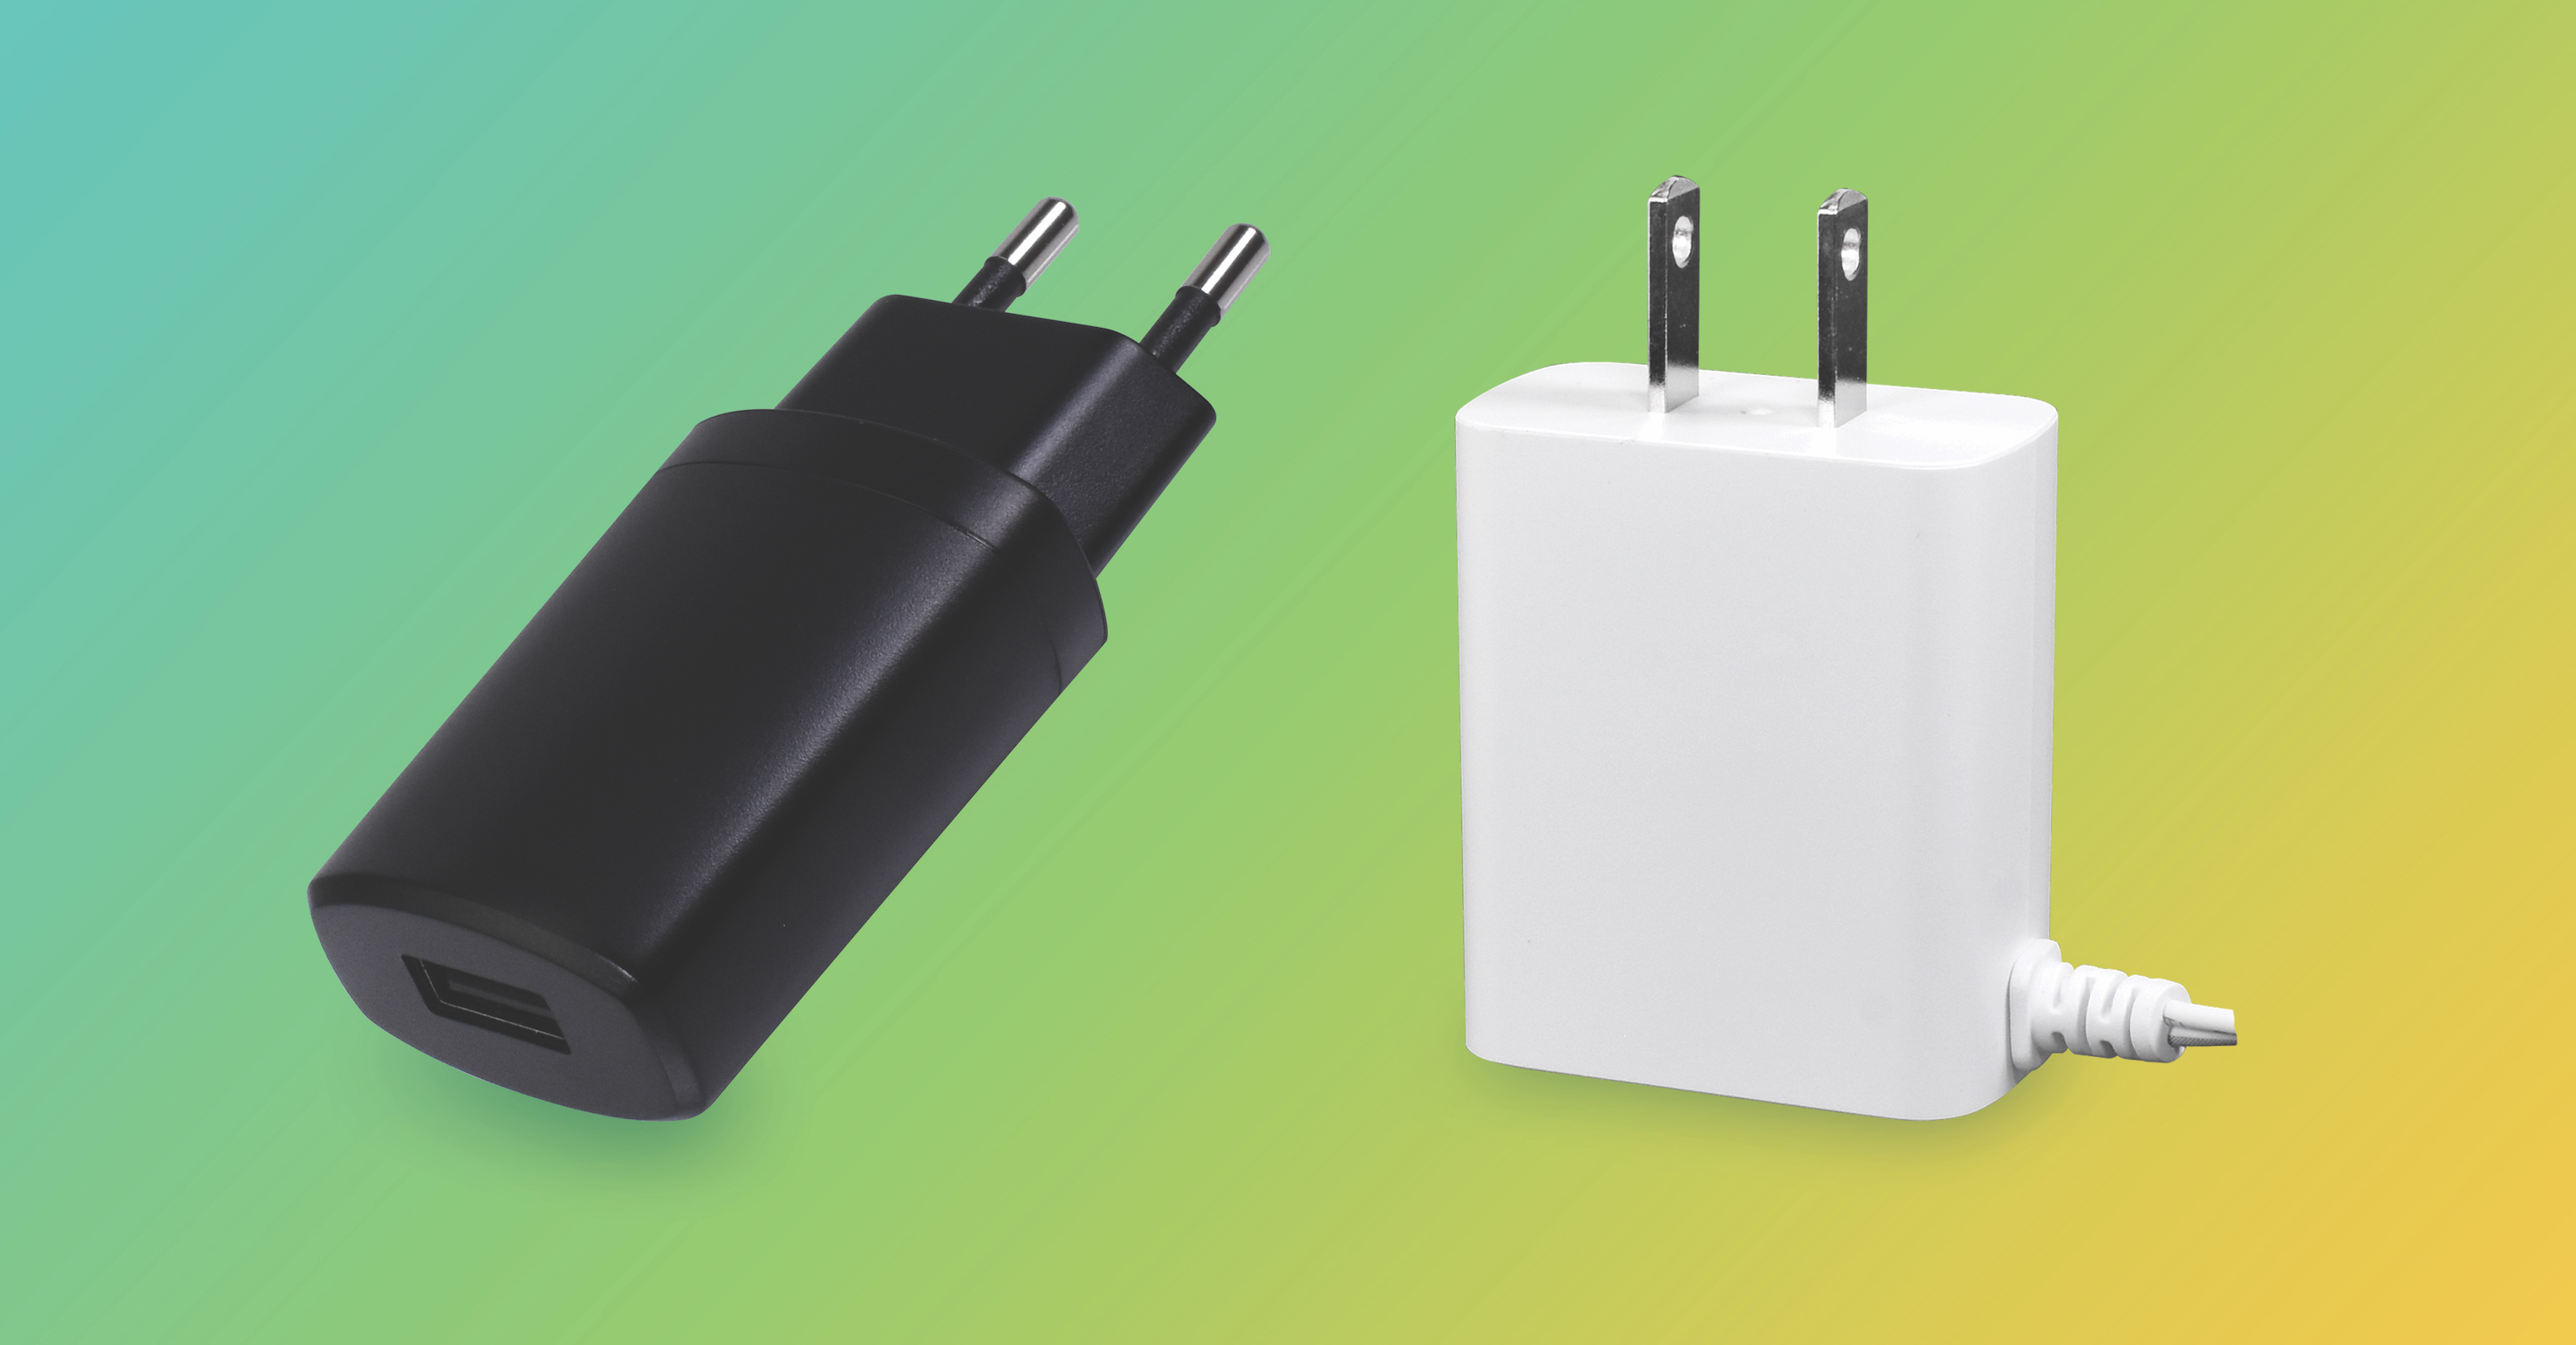 Compact, Efficient, and Economical 10 Watt Adapters